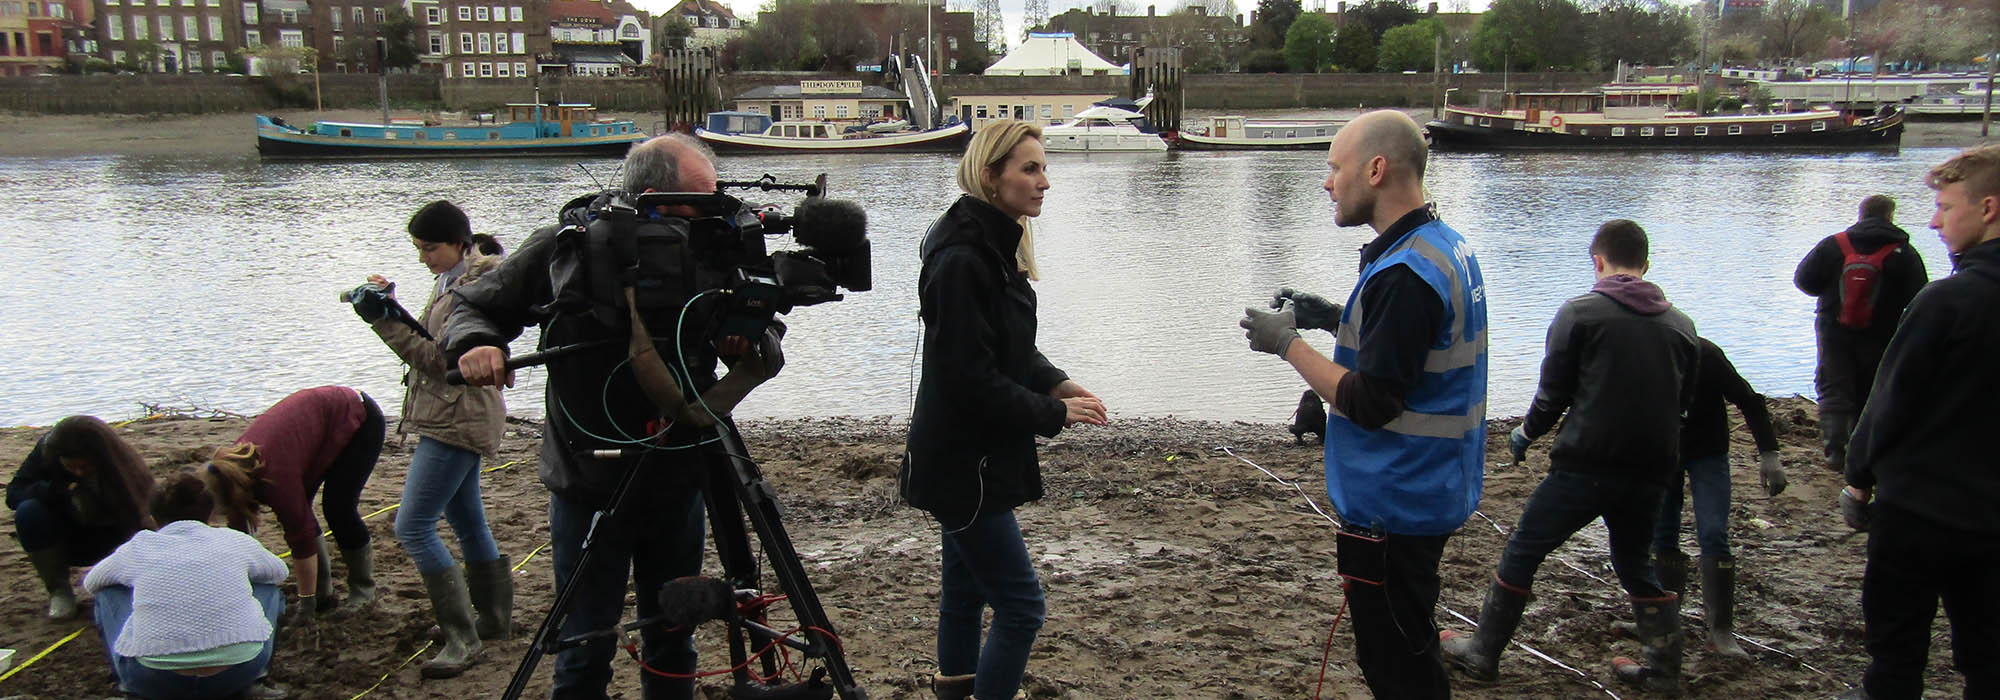 Thames21 launches a new citizen science project for the tidal Thames